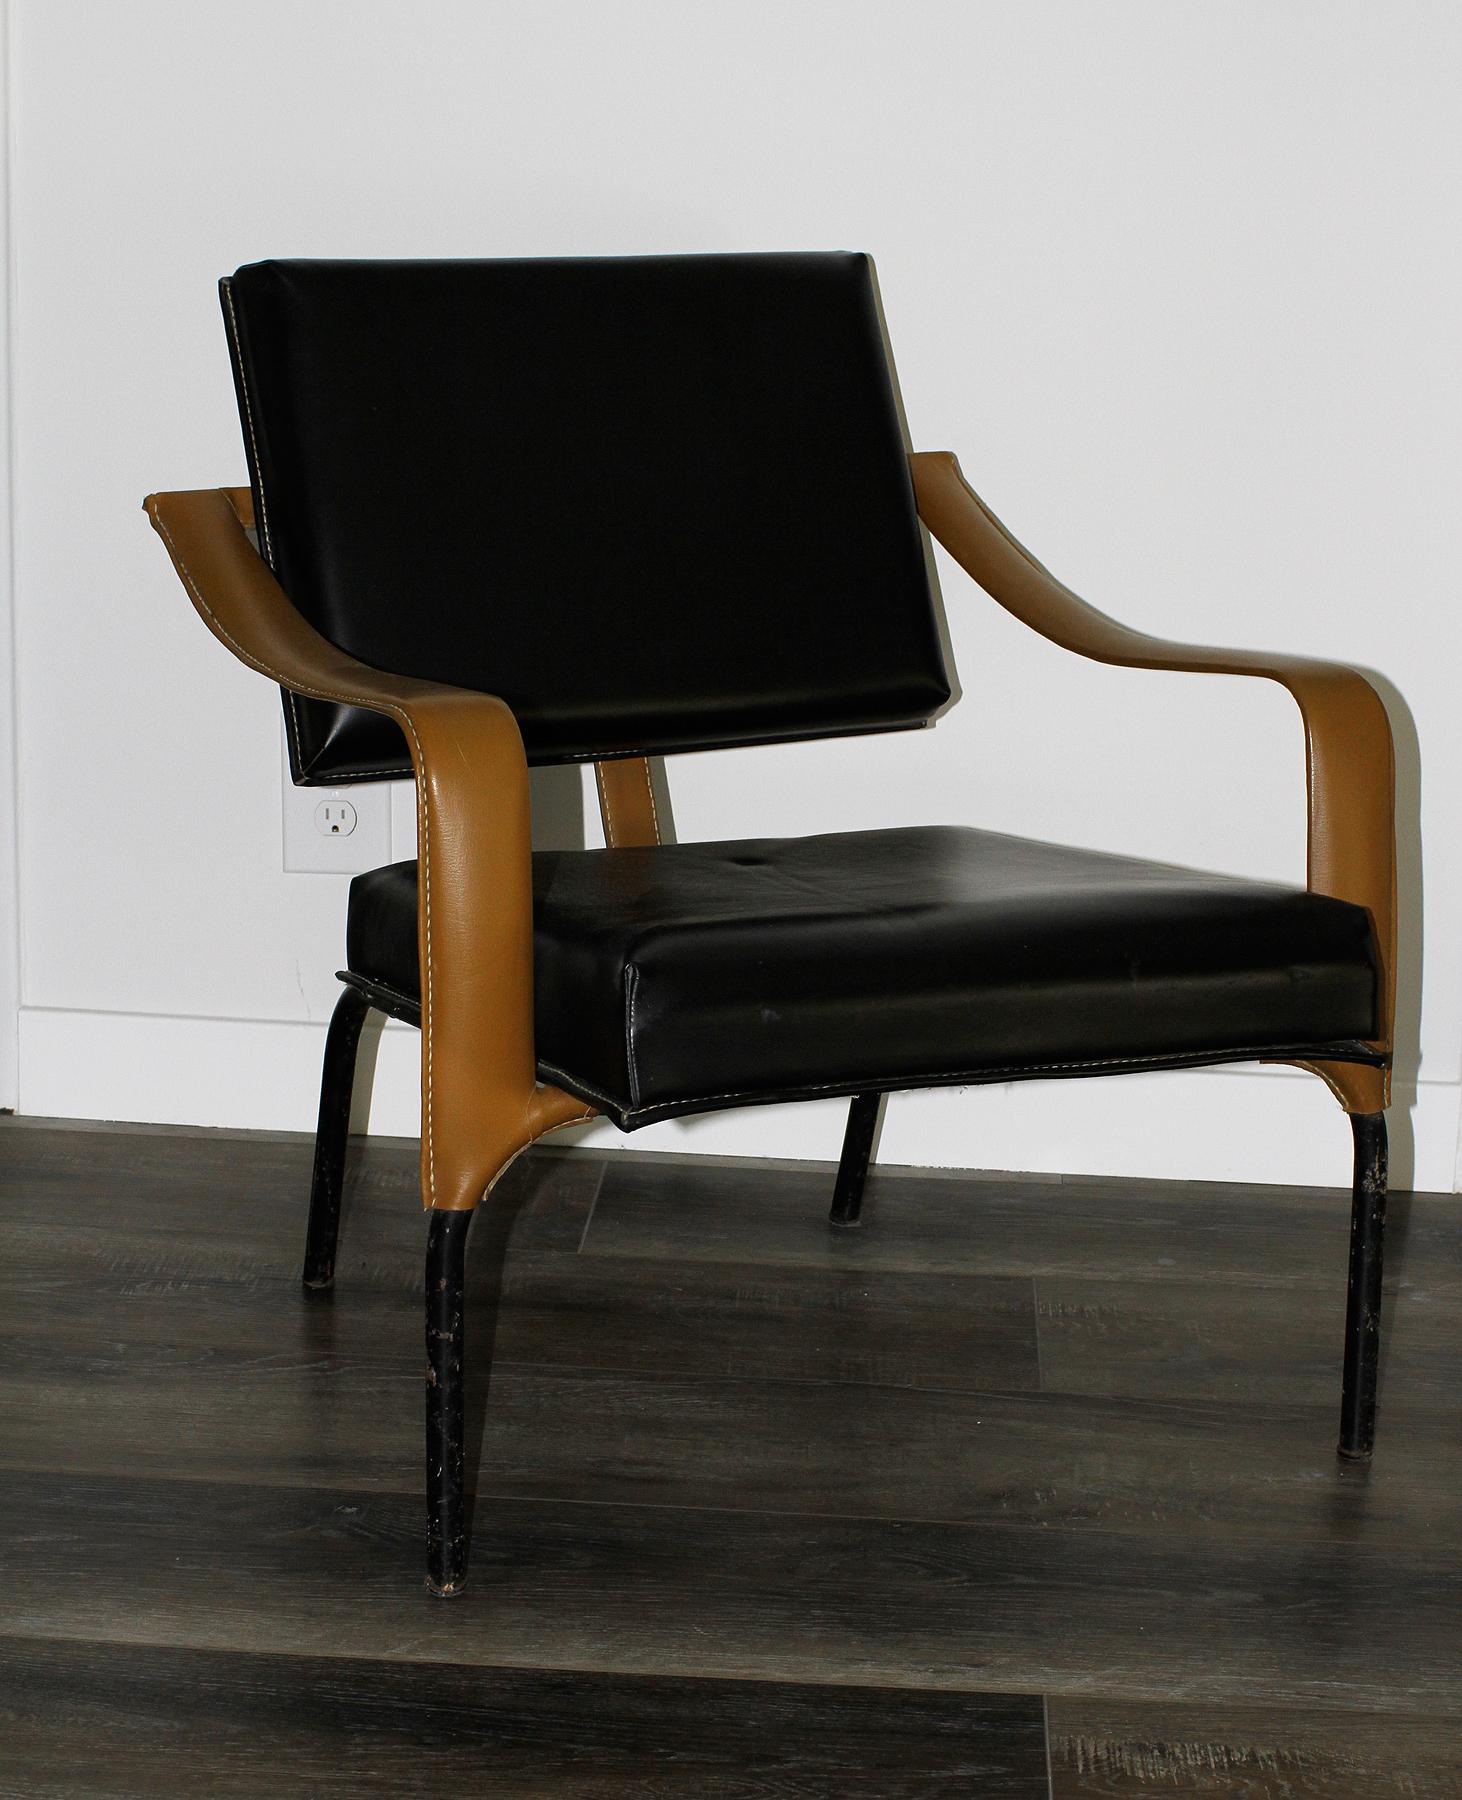 Extremely rare pair of lounge chairs by Jacques Adnet. Original condition.
France, circa 1955-1960.
Edited by Mercier Freres, Paris 12.
Black and brown faux leather on black lacquered metal
Measurements: Height 29”, height2 15”1/2, width 25”3/4,